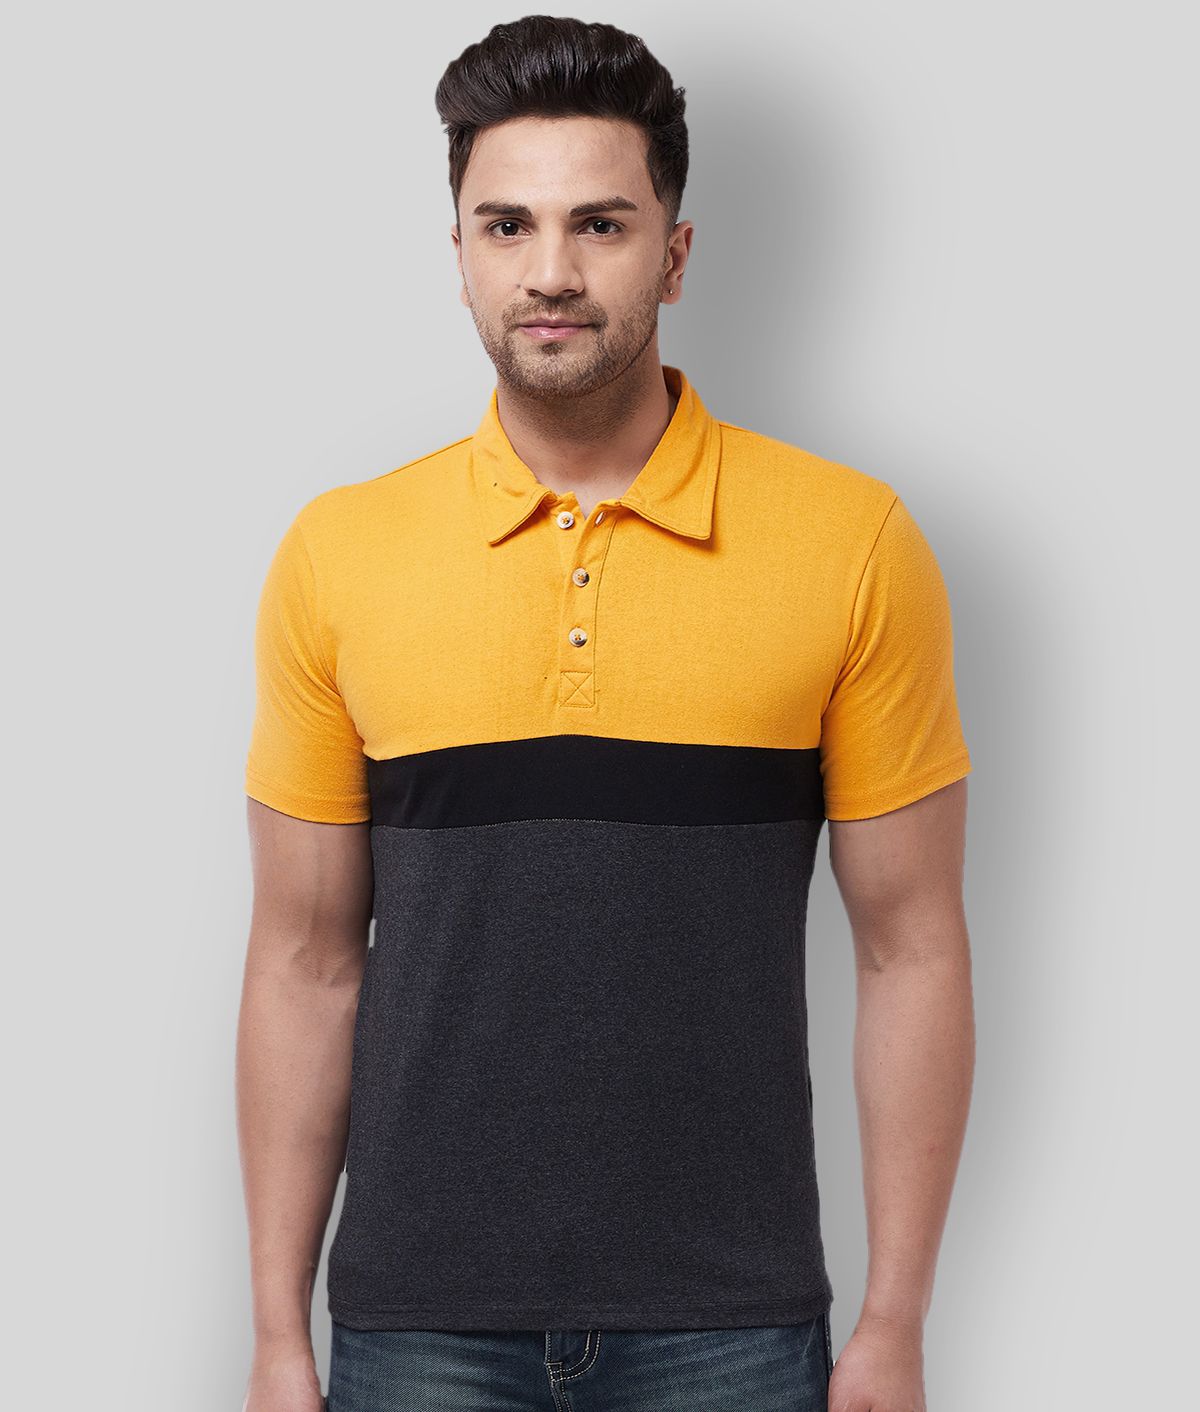 Gritstones - Yellow Cotton Blend Regular Fit Men's Polo T Shirt ( Pack of 1 )